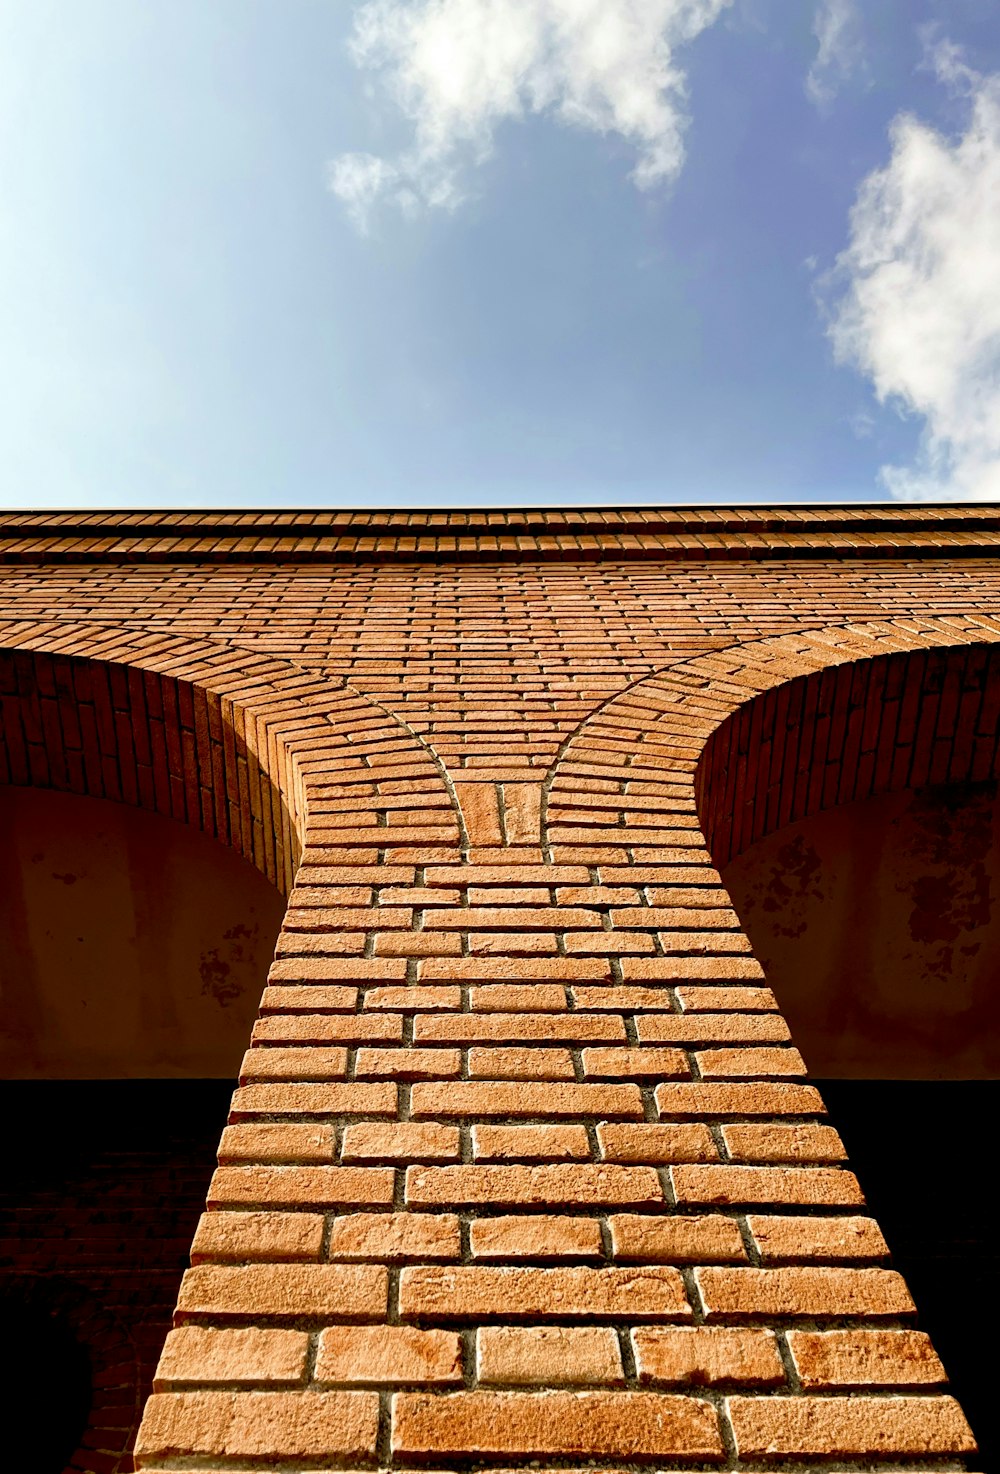 a brick wall with a sky in the background